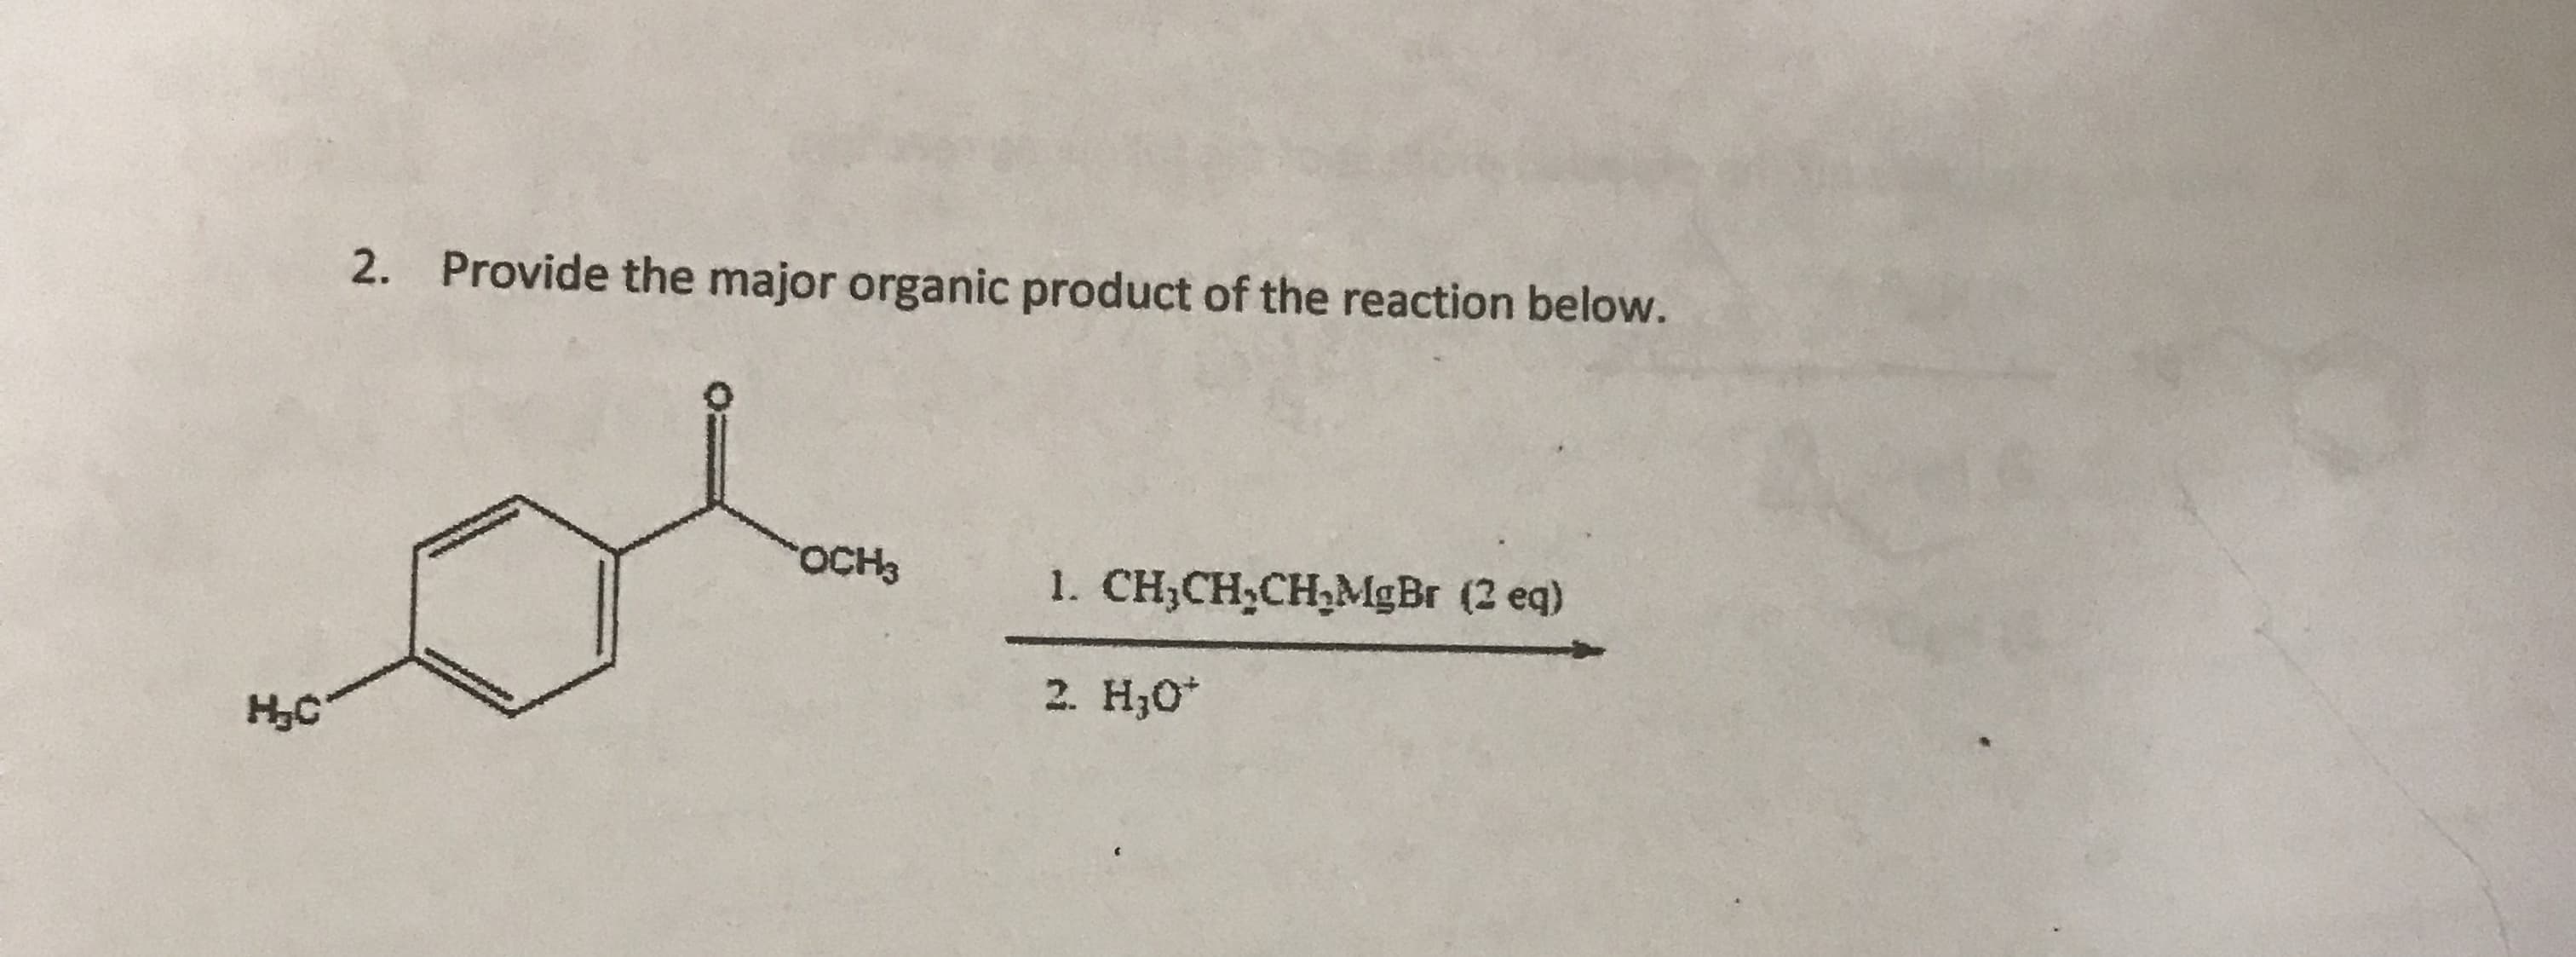 Provide the major organic product of the reaction below.
2.
OCH3
1. CH,CH2CH,MgBr (2 eq)
2. H30*
HyC
